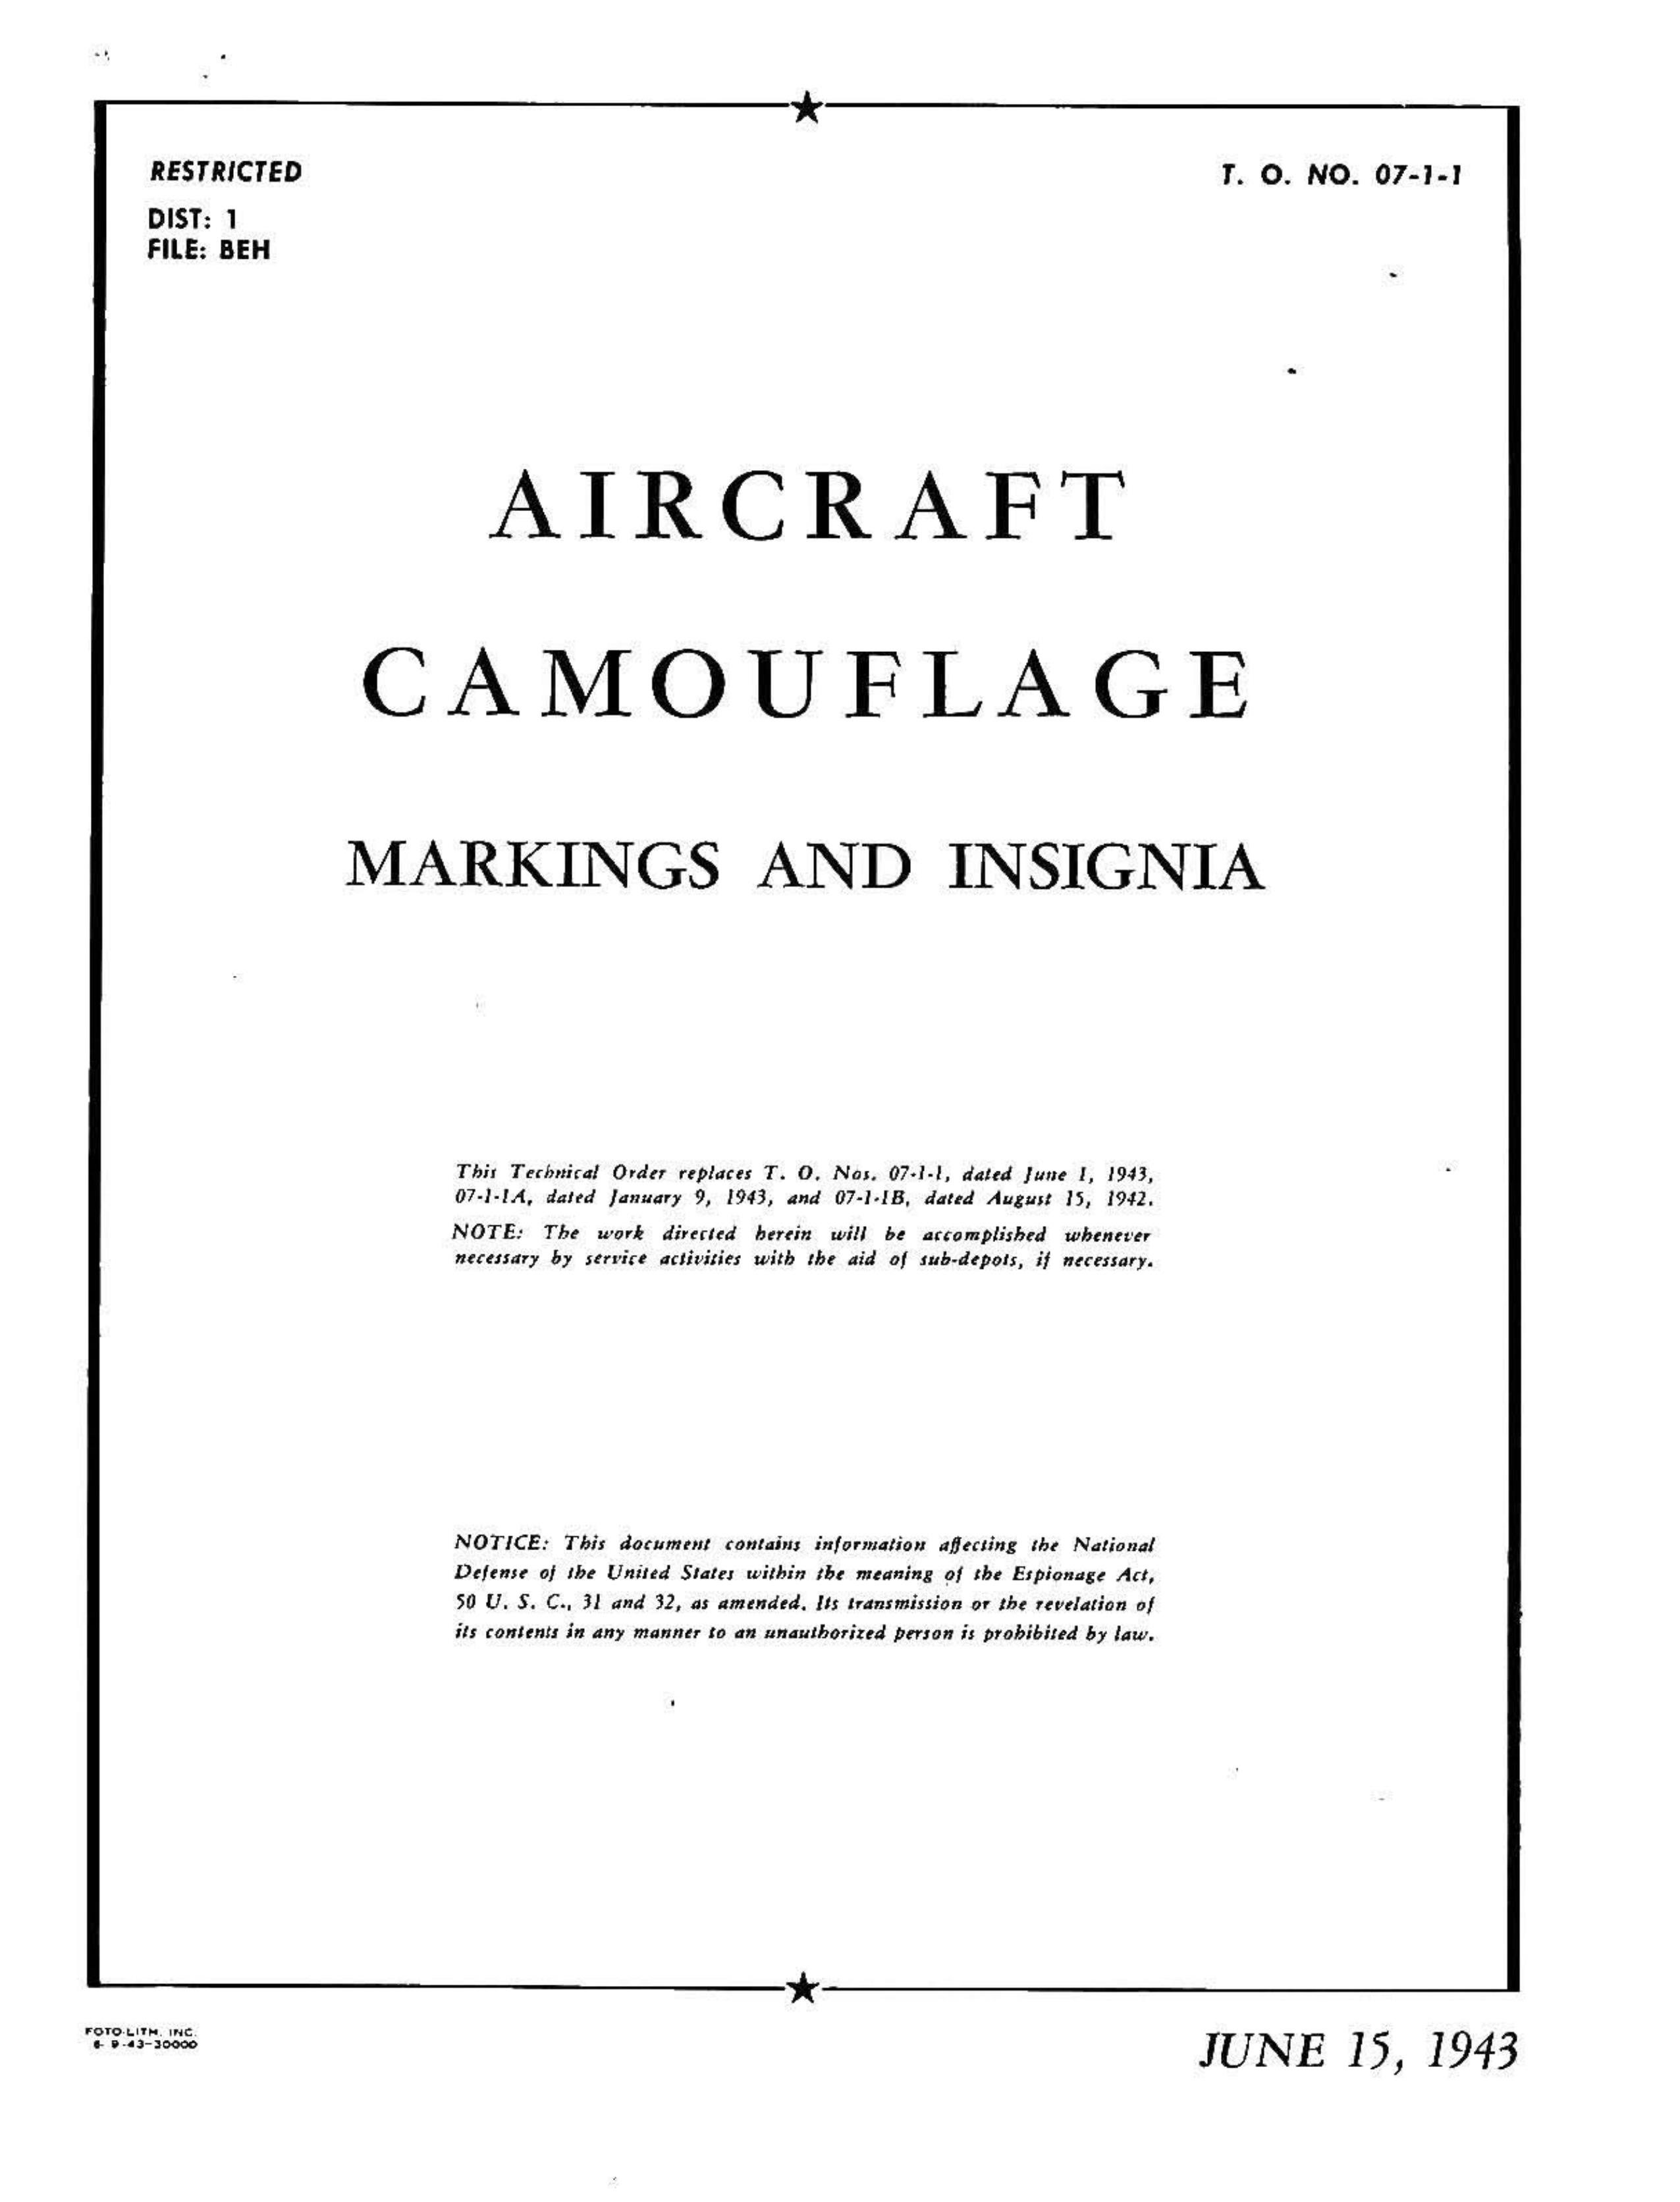 Sample page 1 from AirCorps Library document: Aircraft Camouflage Markings and Insignia